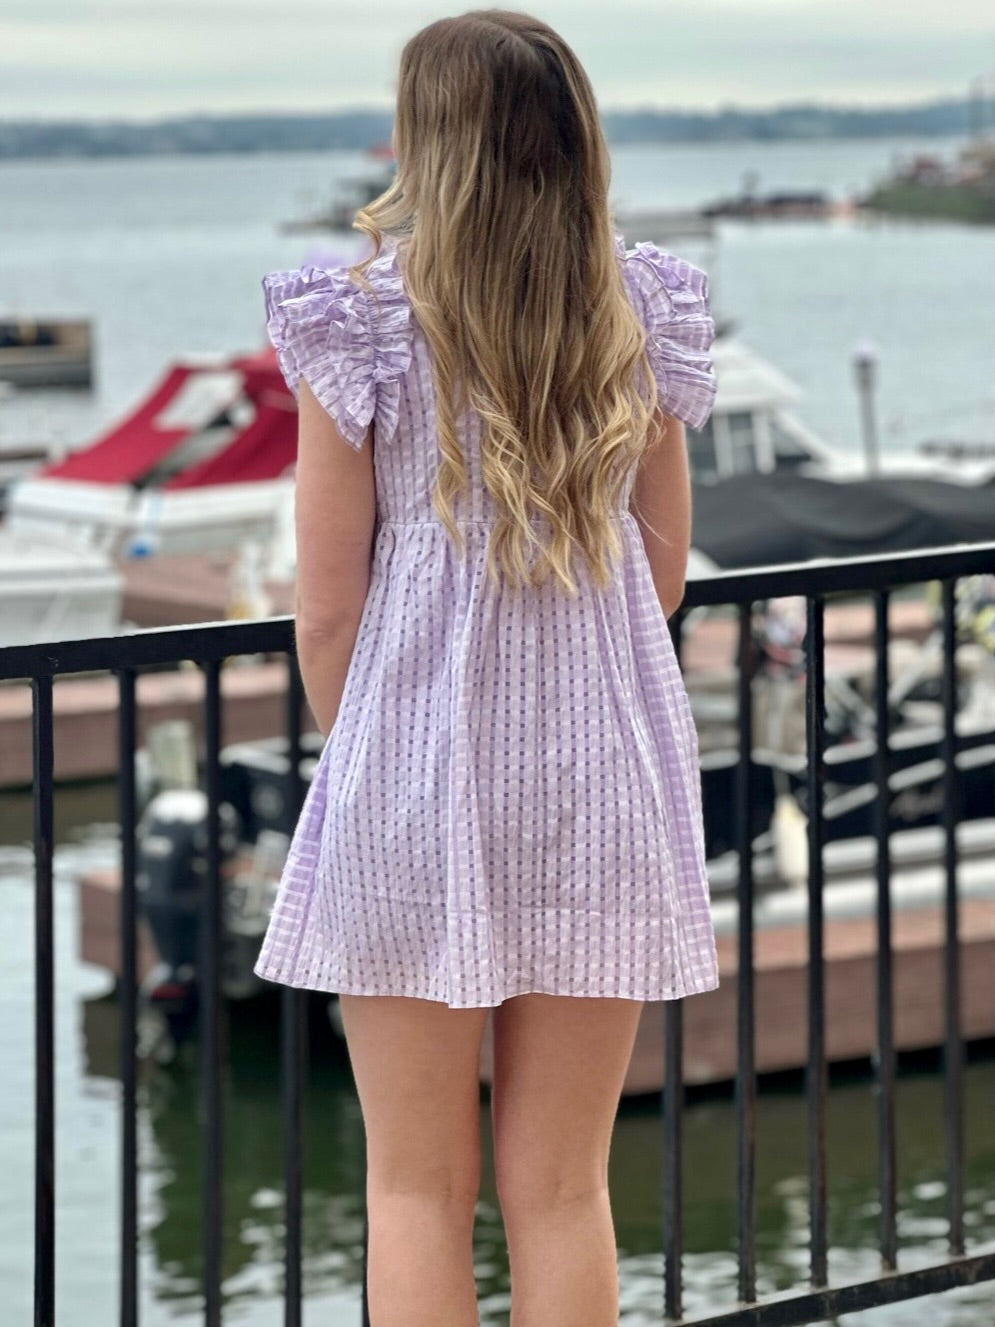 Lexie in lavender dress back view